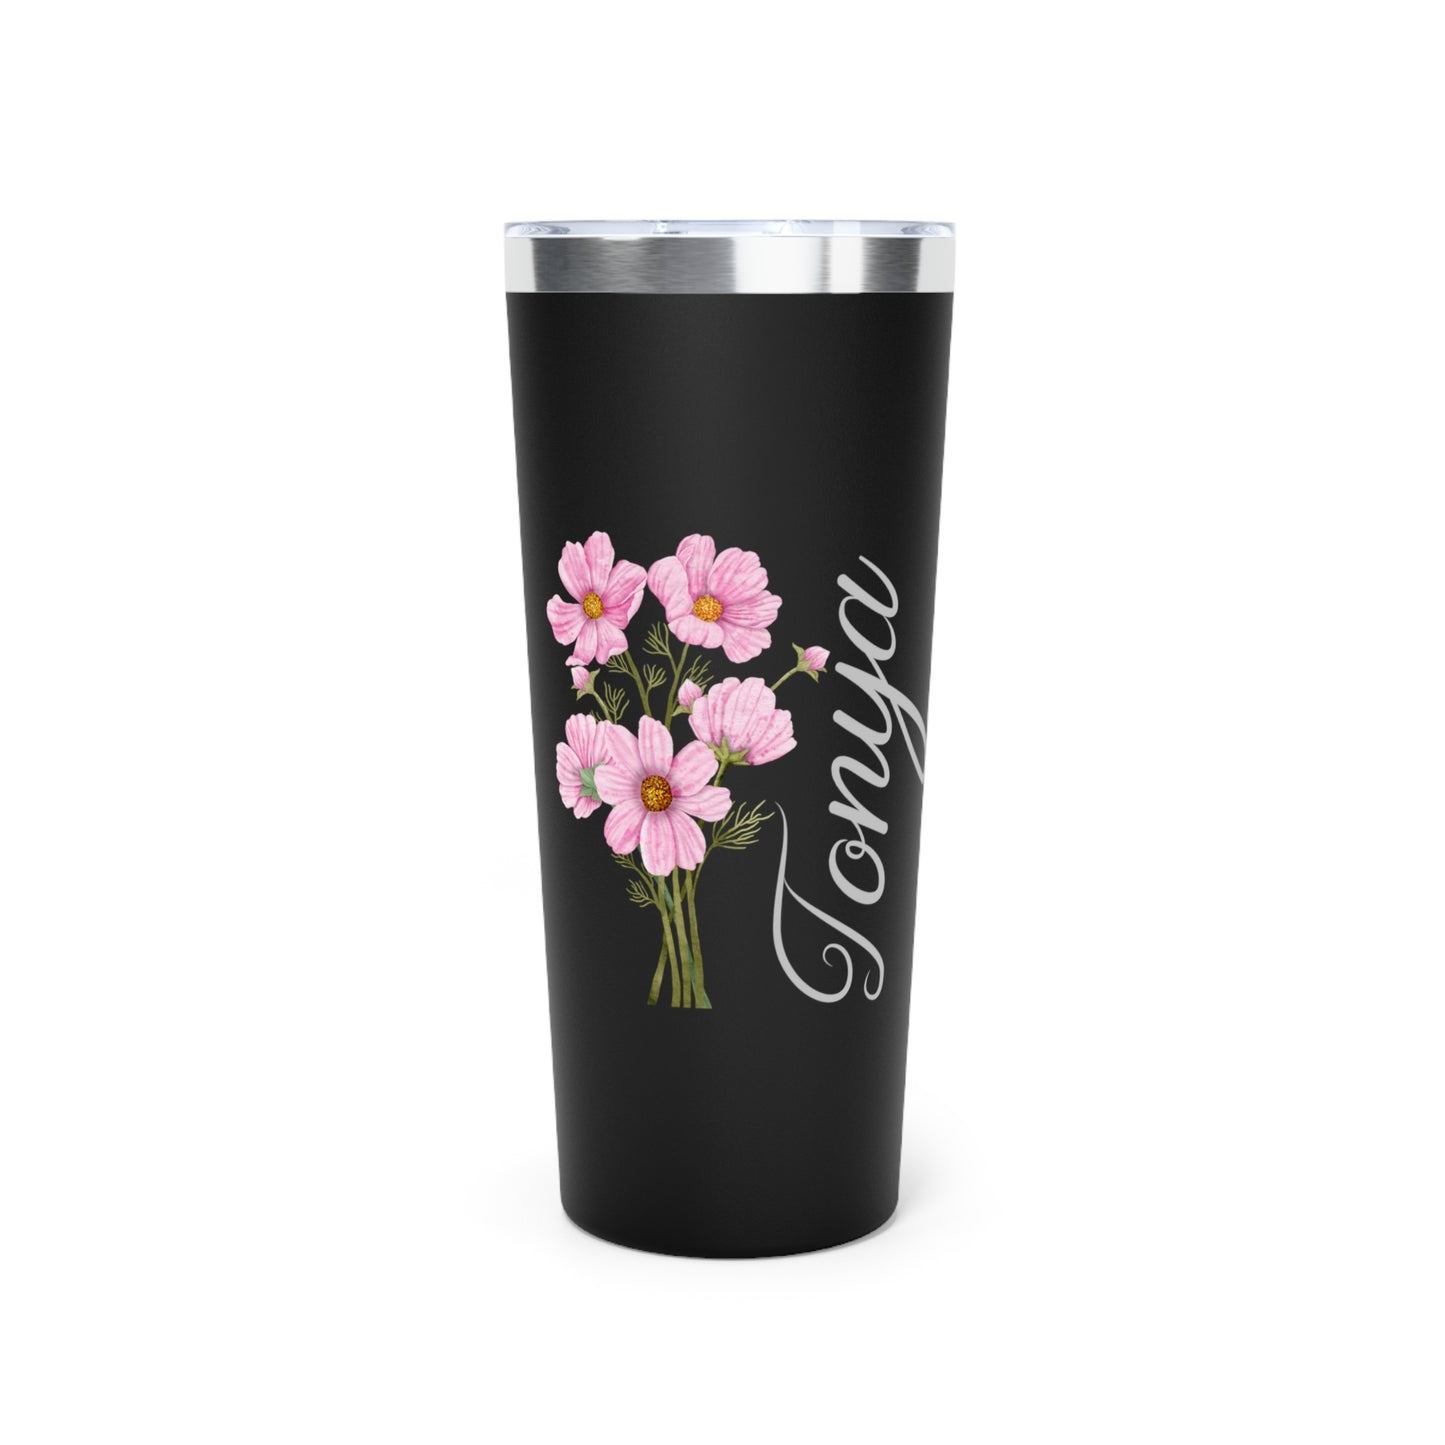 October Personalized Birth Flower Tumbler, Personalized Birth Flower Coffee Cup With Name, Gifts for Her, Bridesmaid Proposal, Party Favor